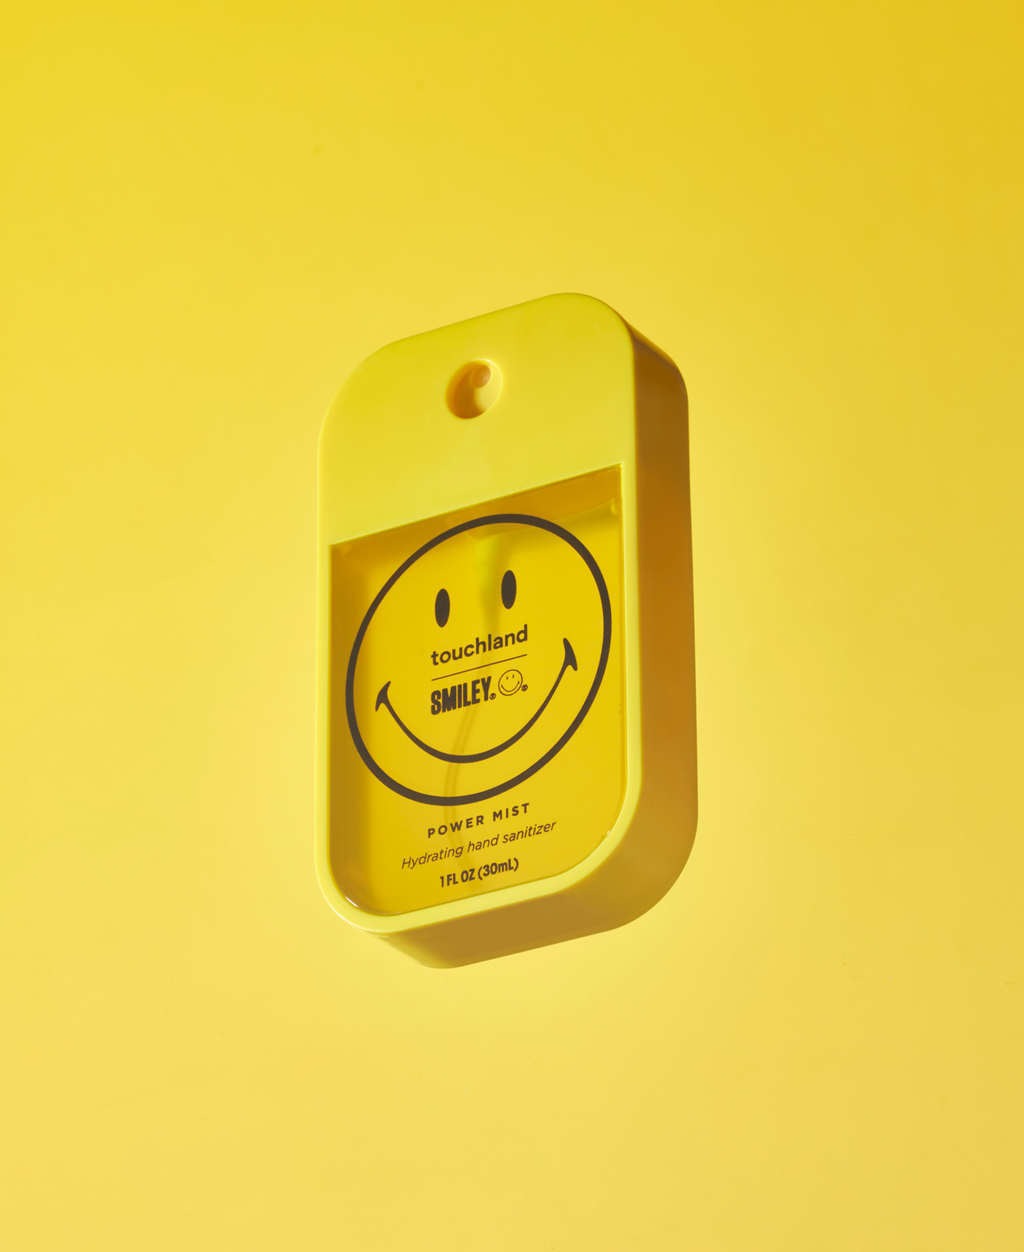 Smiley Power Mist floating on a yellow background#mango-passion